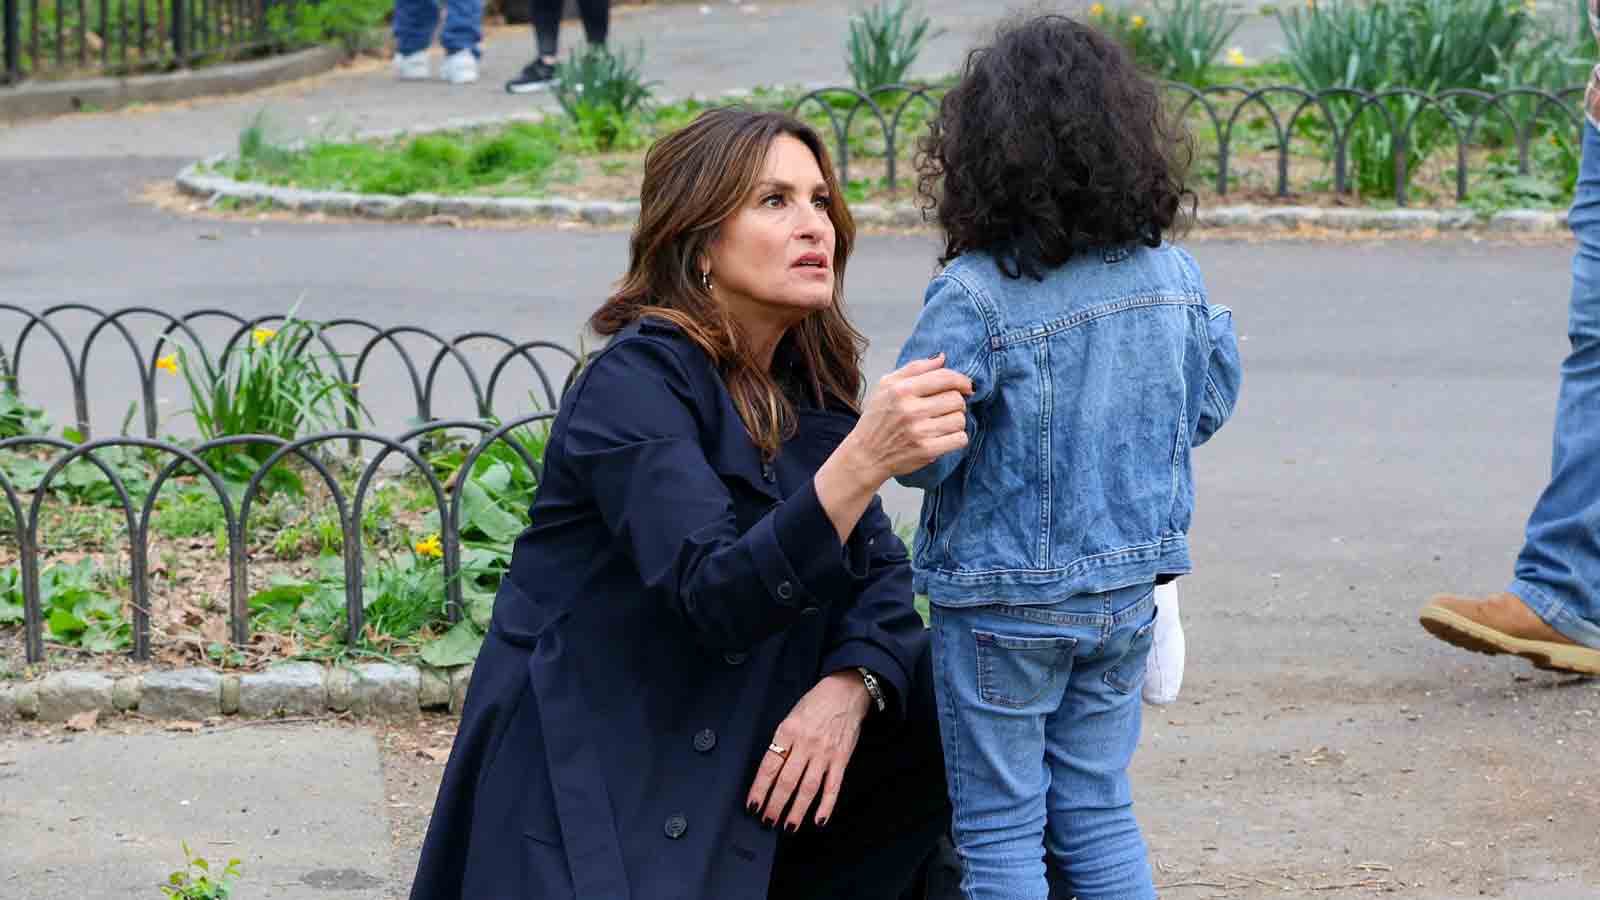 Mariska Hargitay helps little girl reunite with mom after she's
mistaken for real-life cop